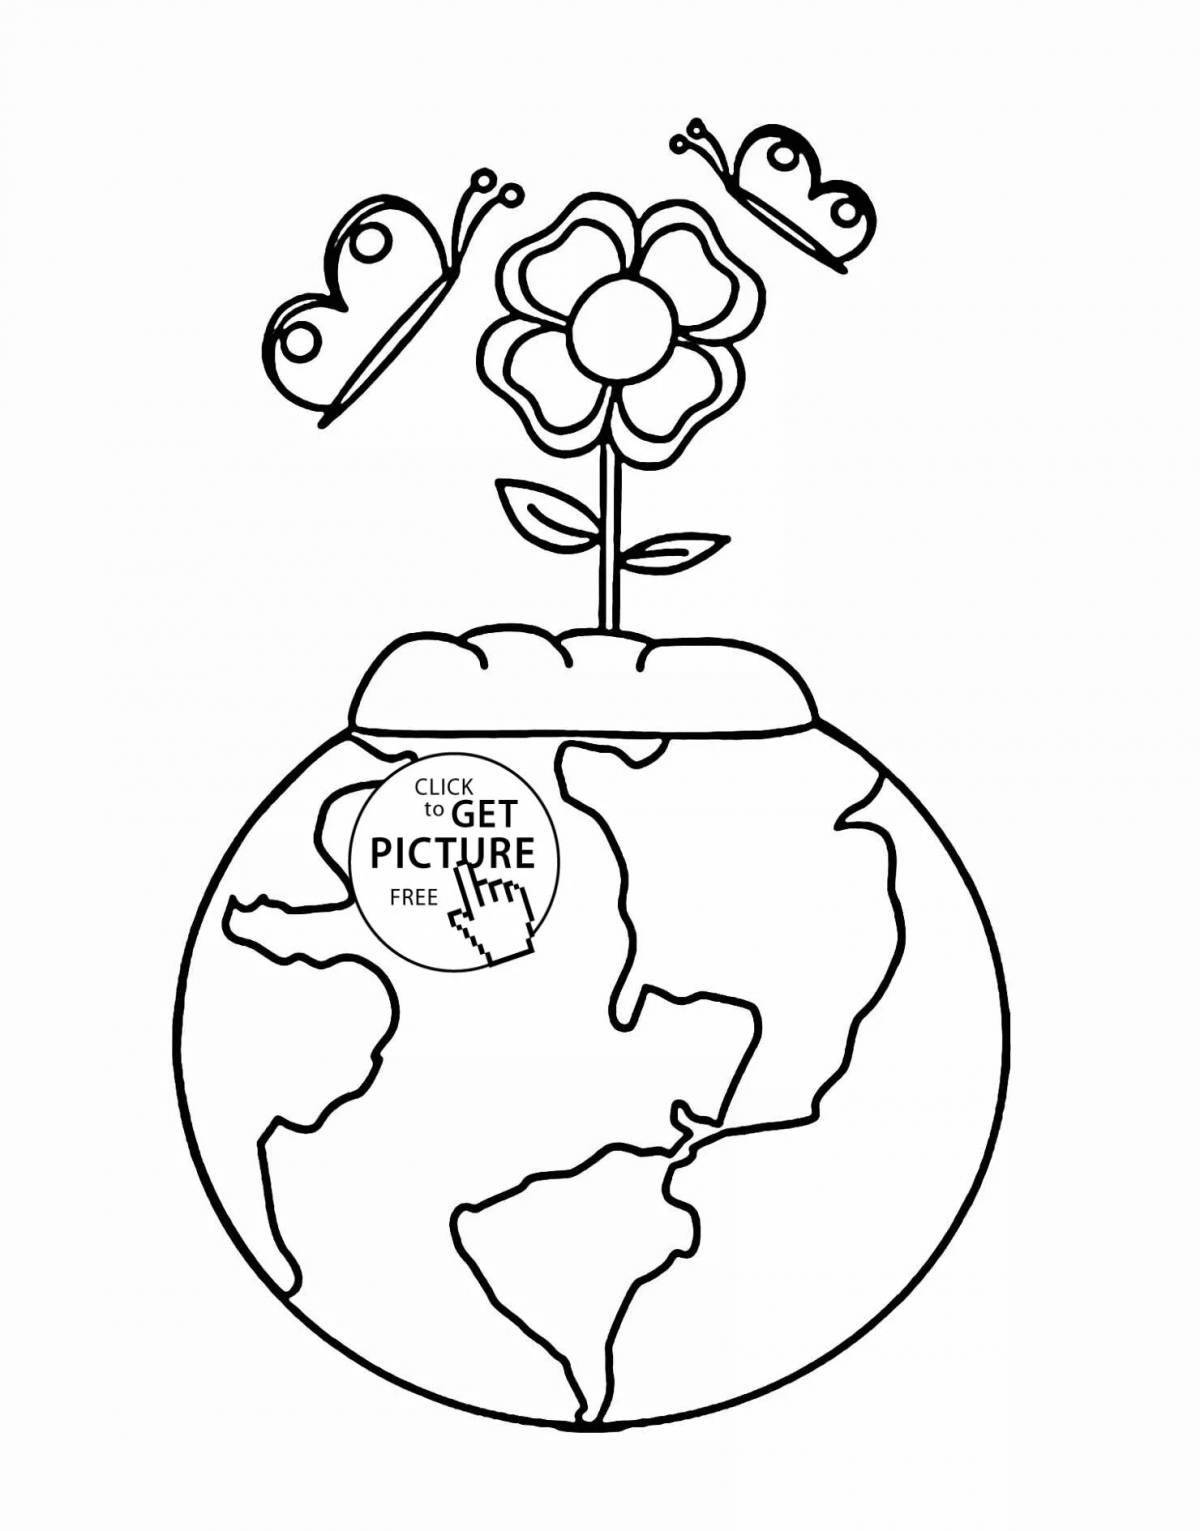 Gourmet plant care coloring page